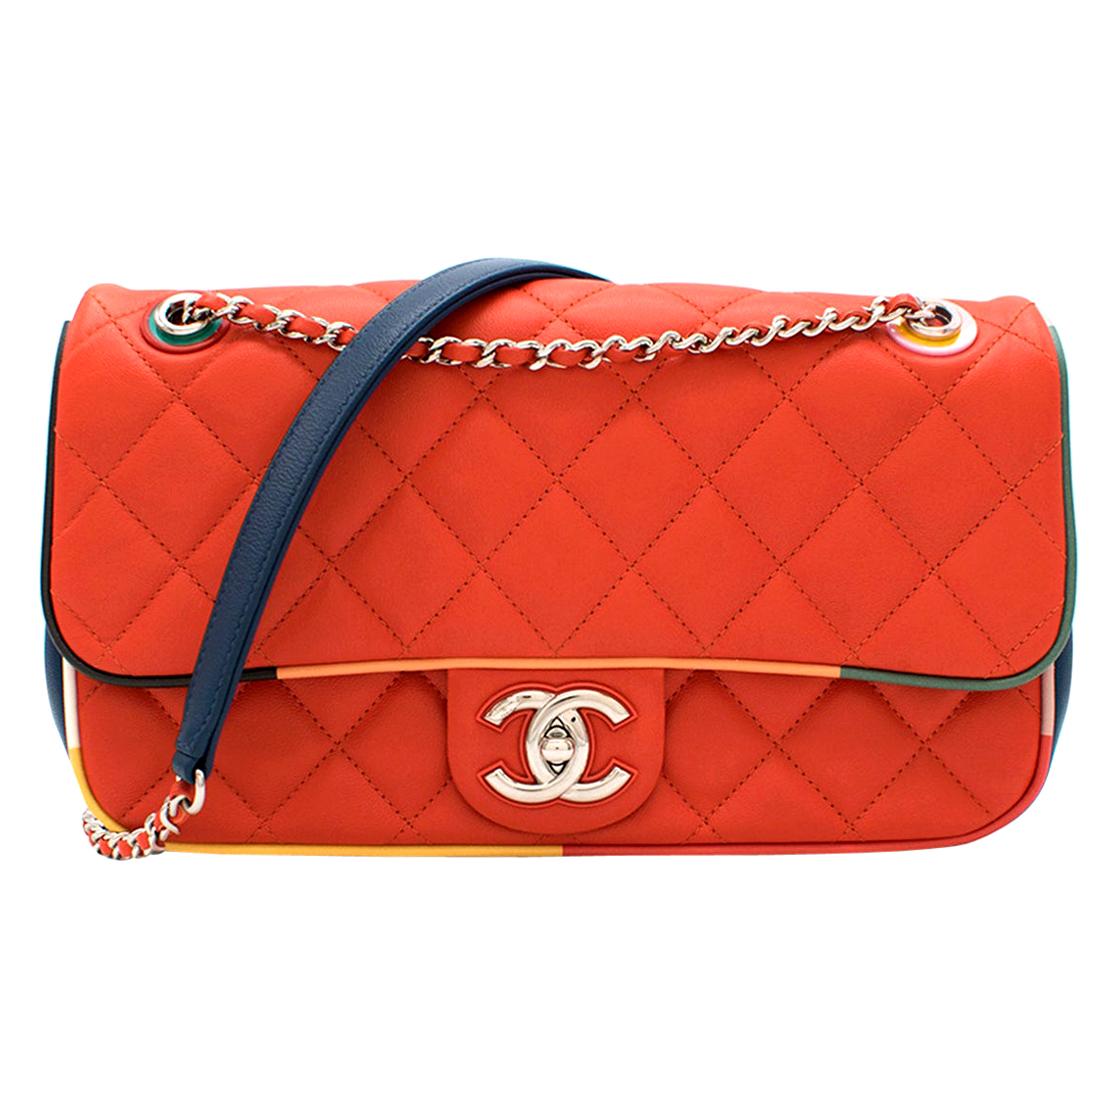 Chanel Cruise Collection Multi-Colour Flap Bag